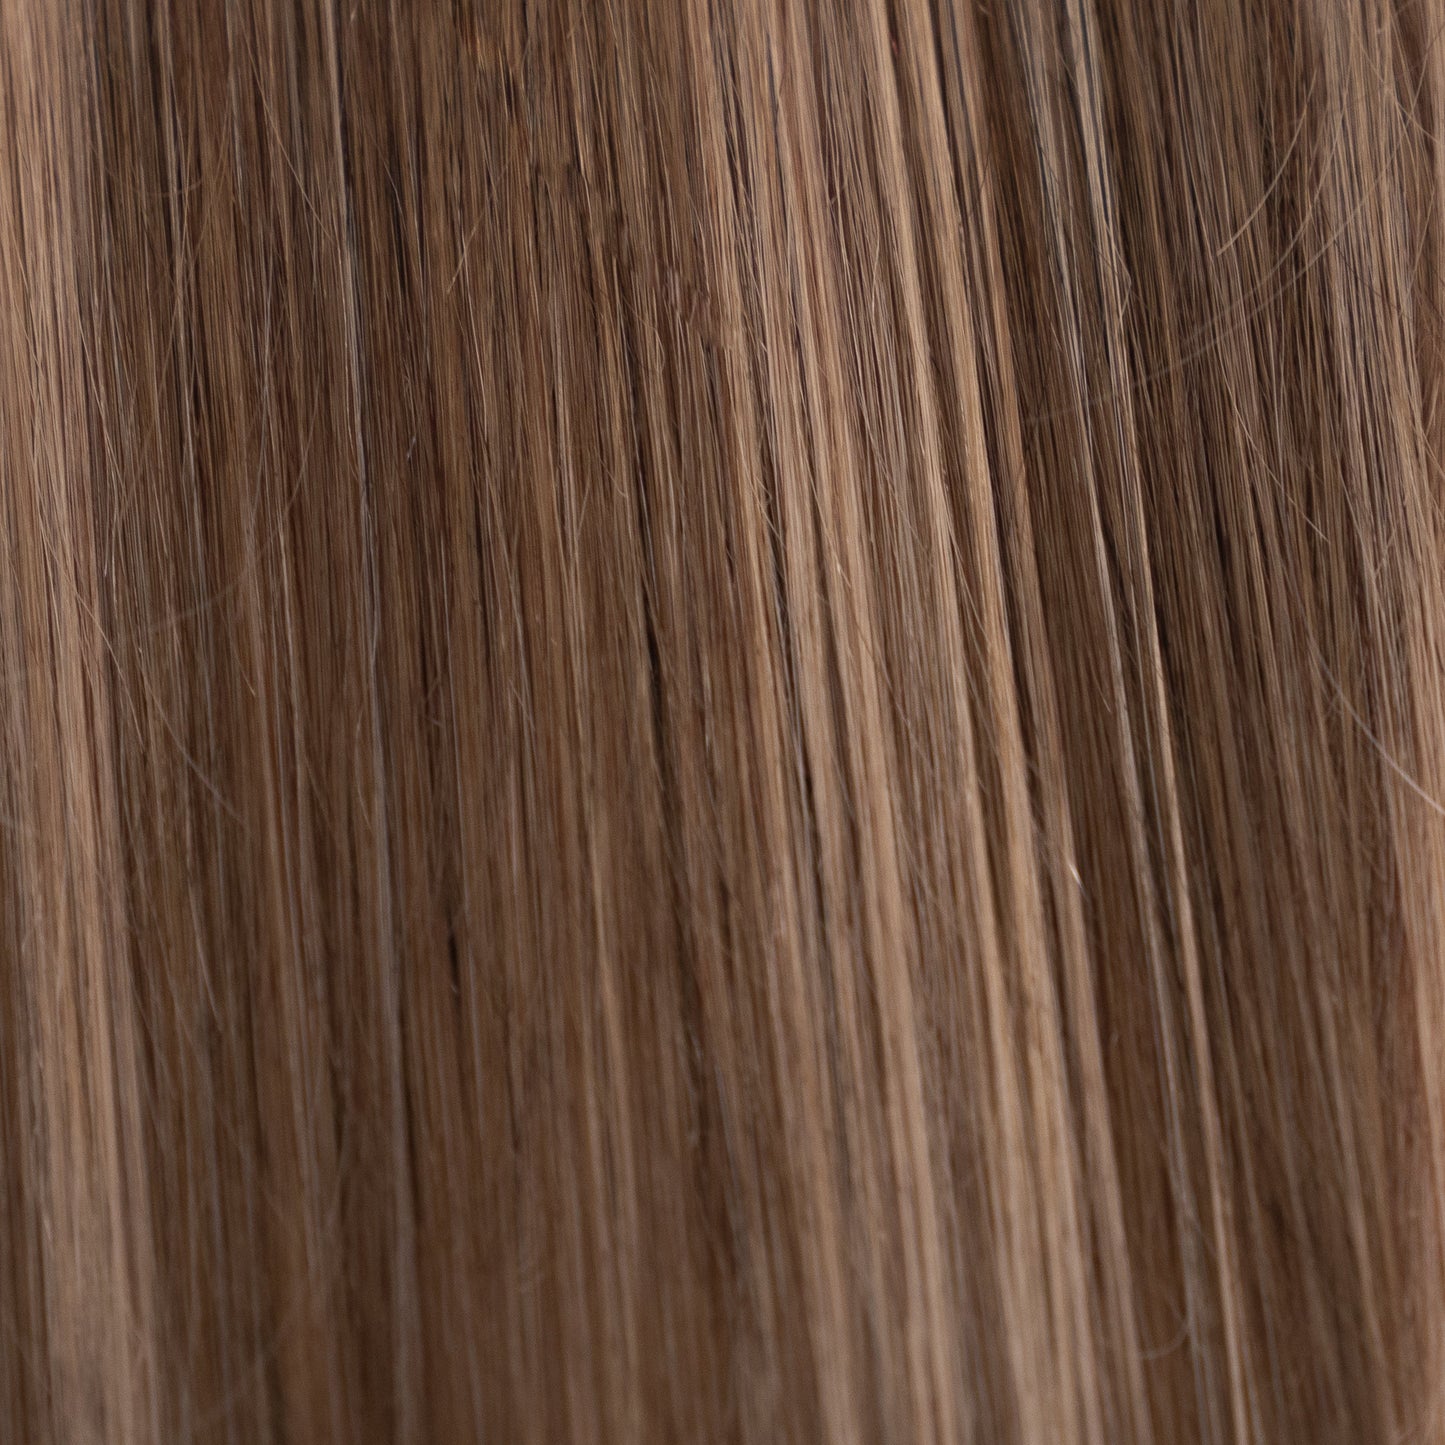 K-Tip 24" 25g Professional Hair Extensions - #4/27 Highlight Chocolate Brown